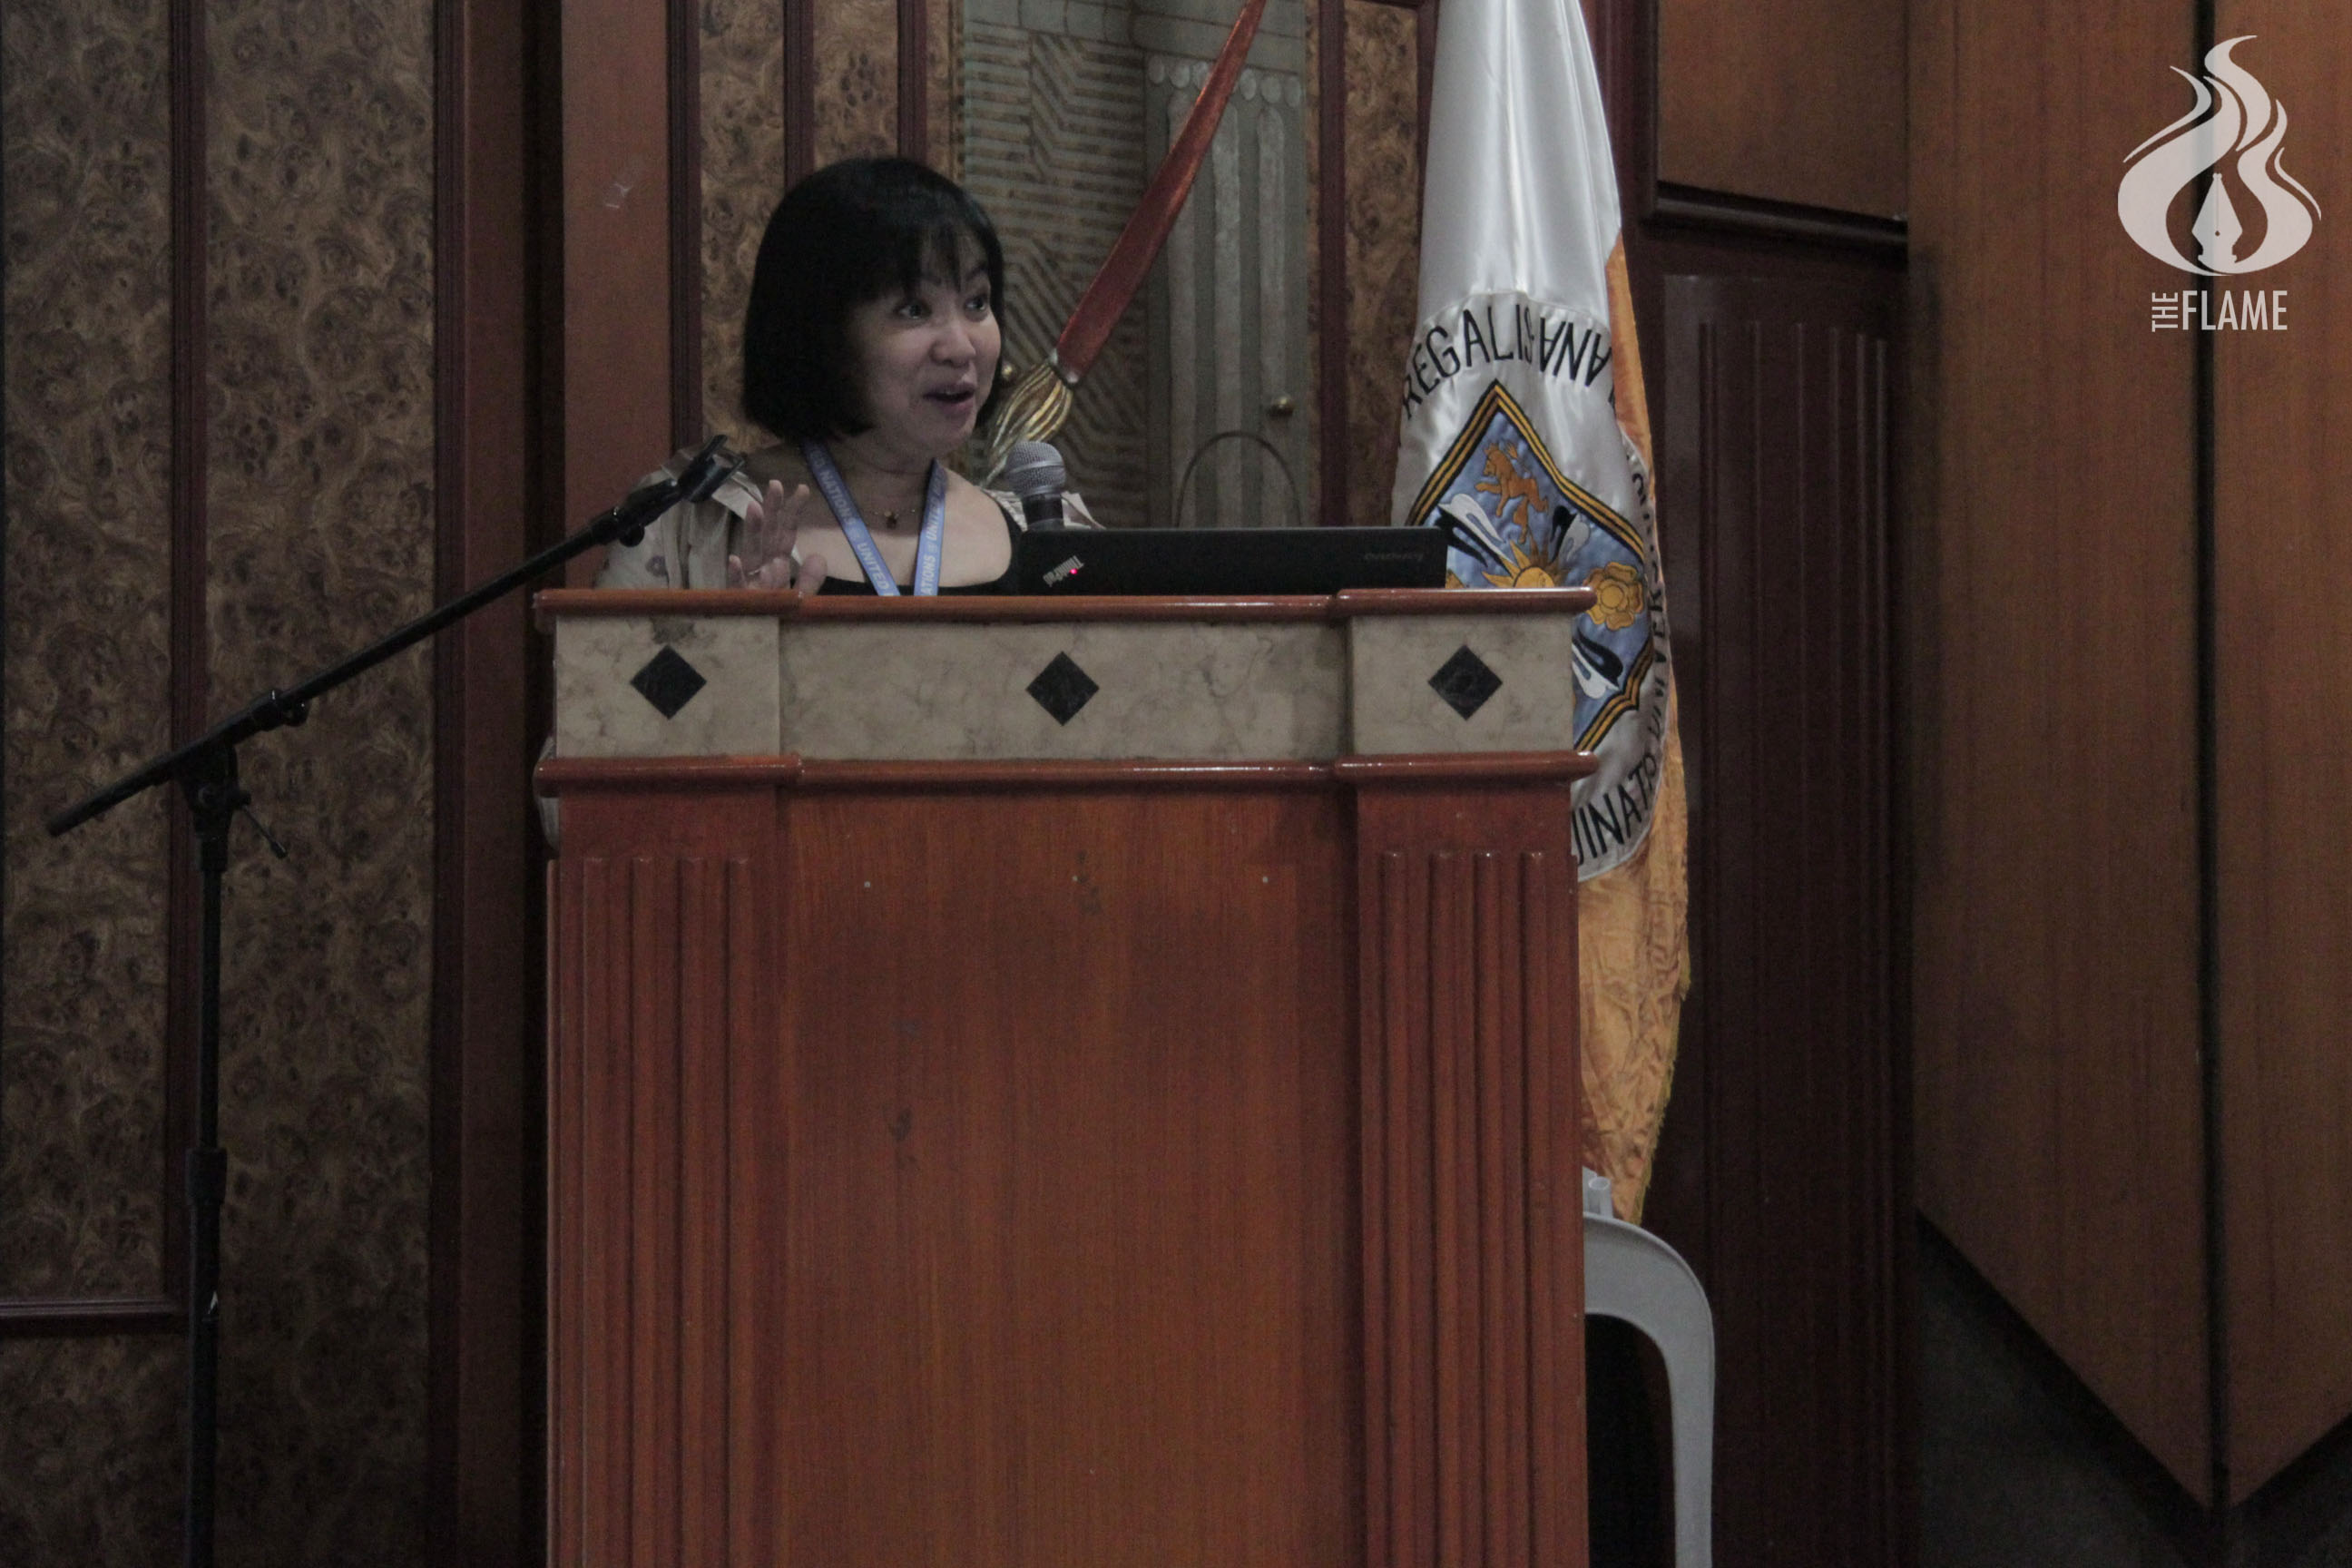 Everyone can contribute to attain global goals, UN officer tells Thomasians